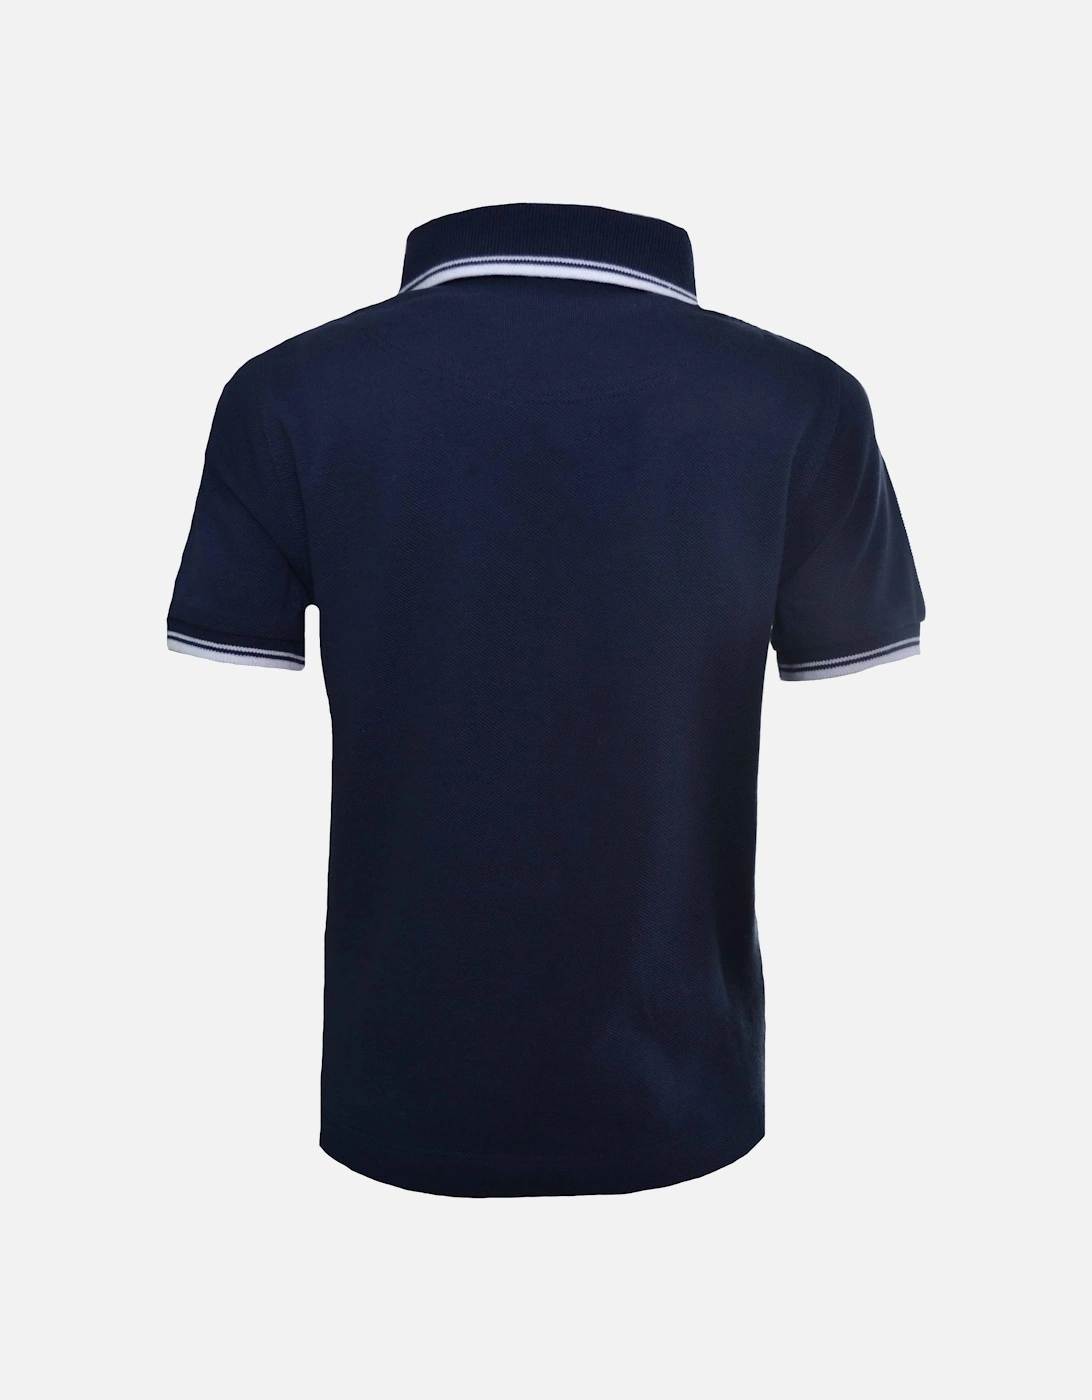 Infants And Kids Navy Blue Polo Shirt